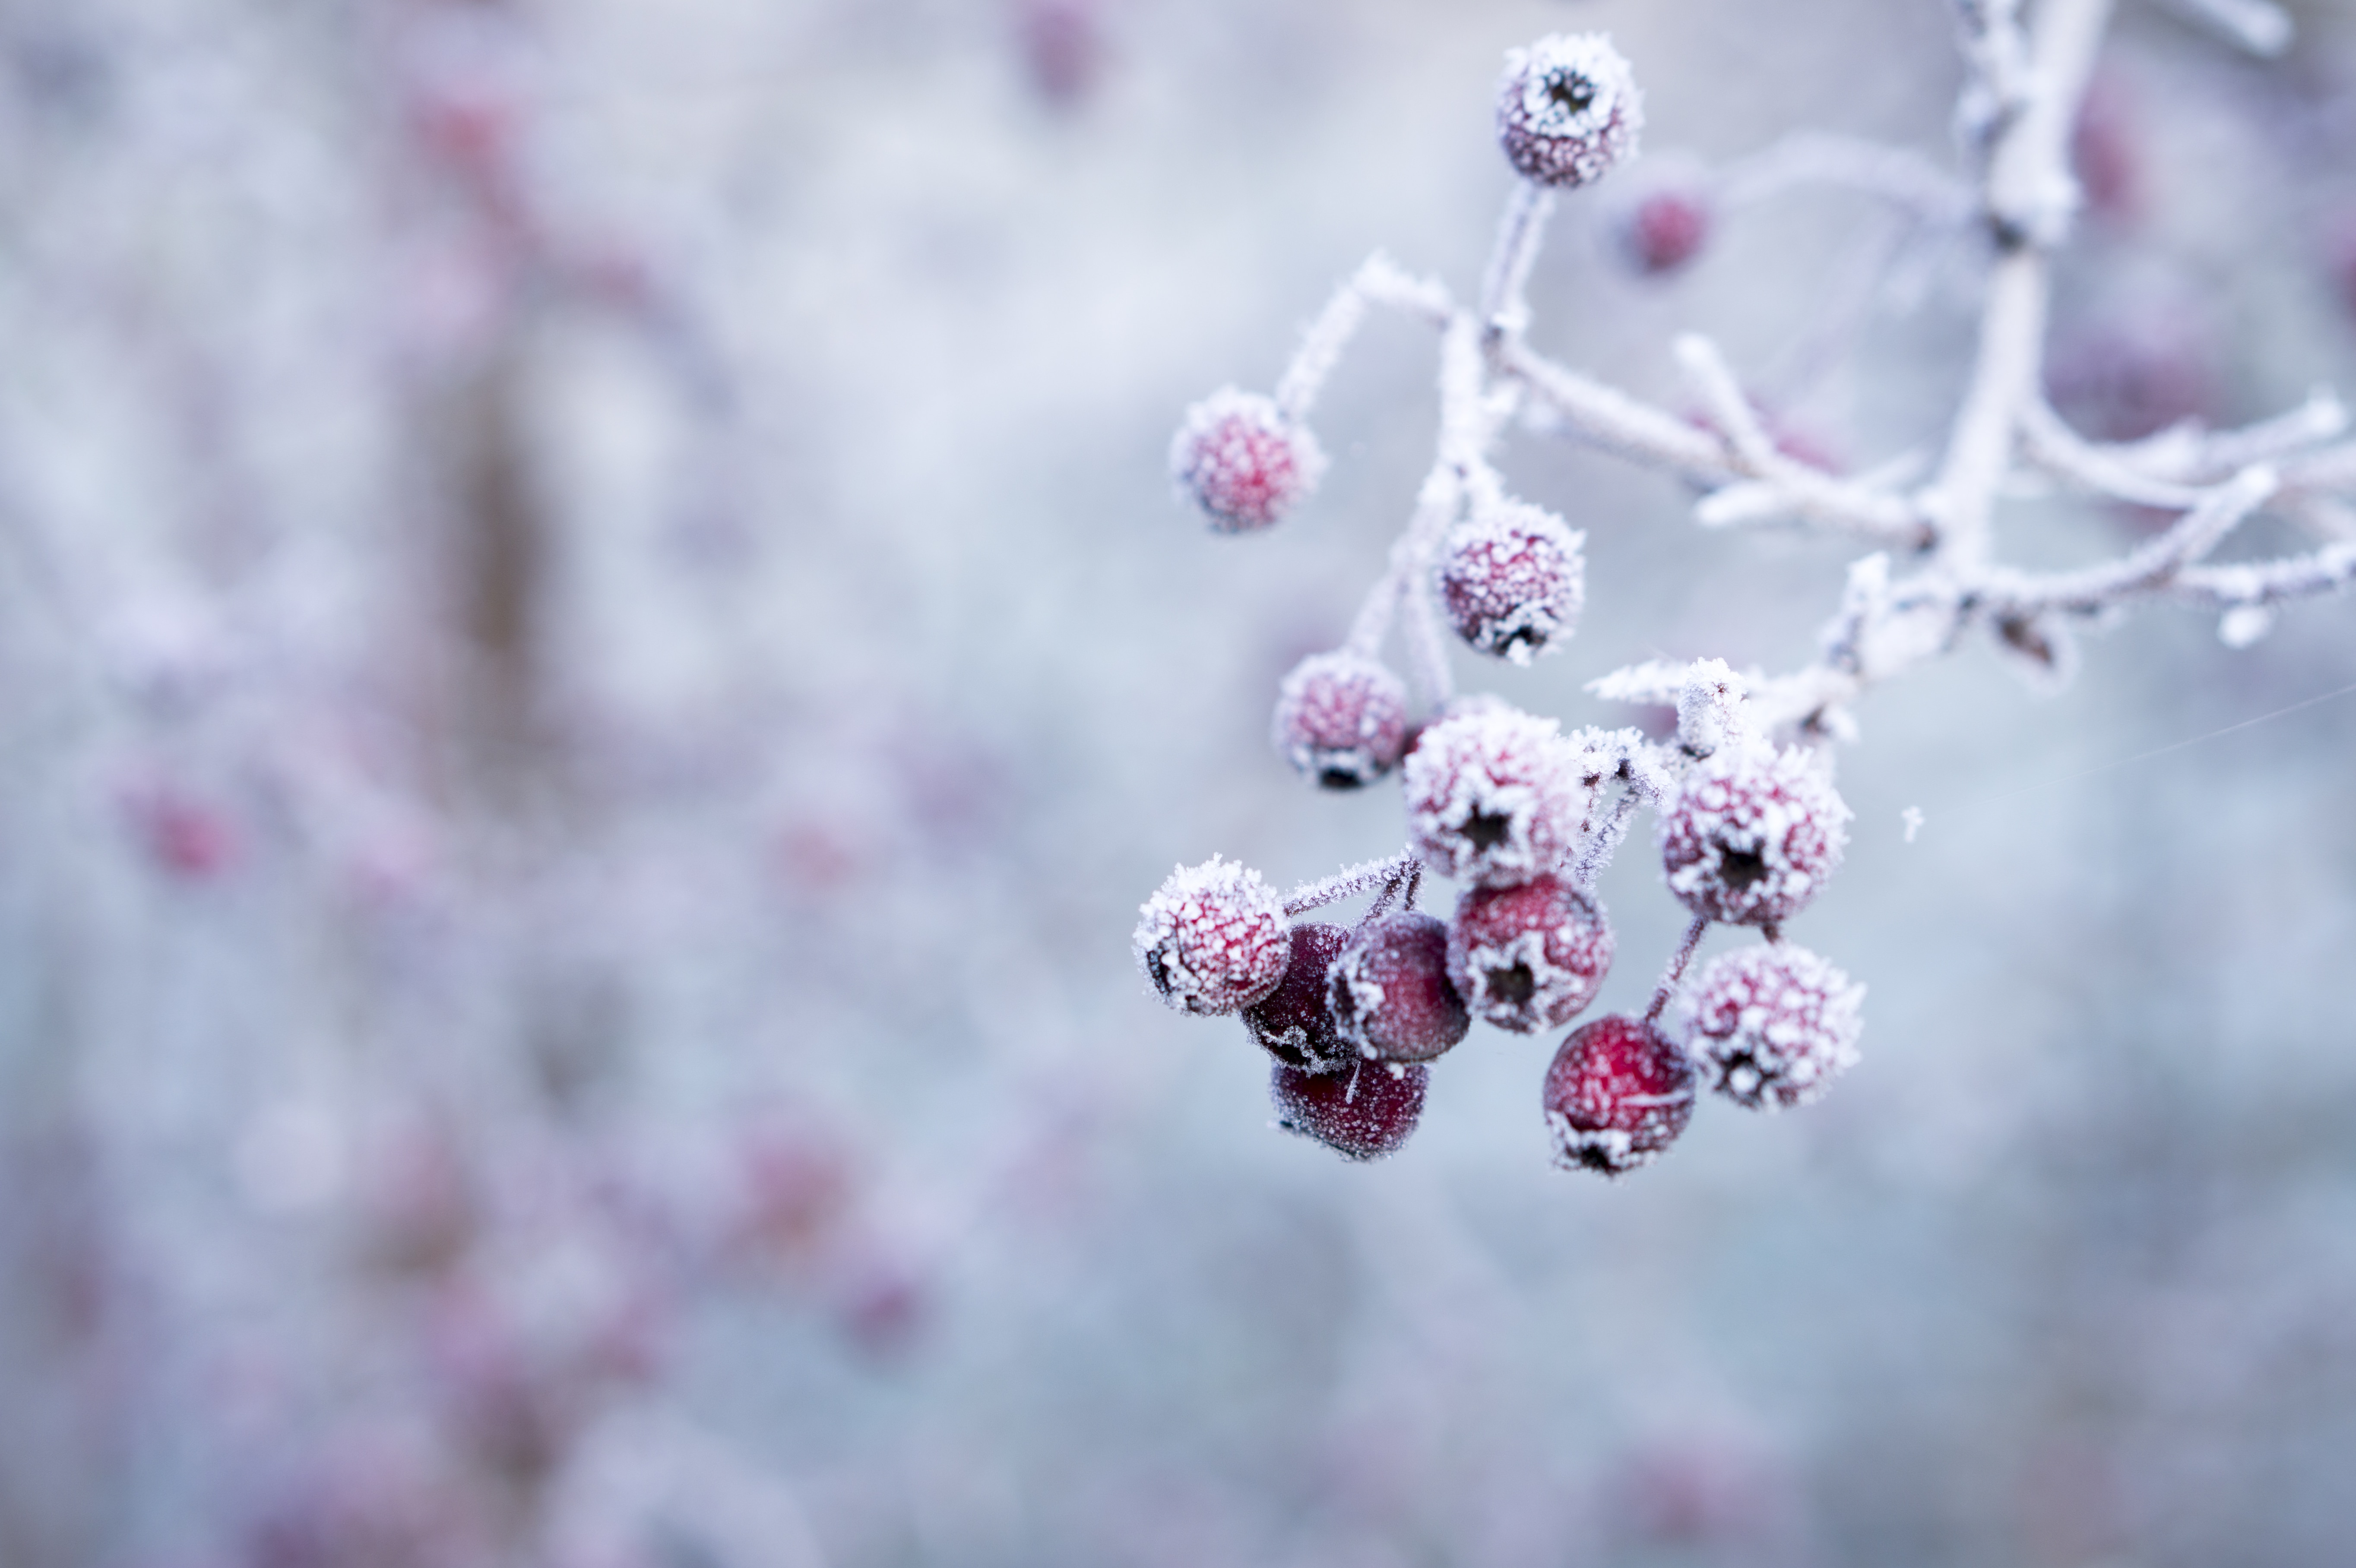 shallow focus photography of red fruits covered on snow